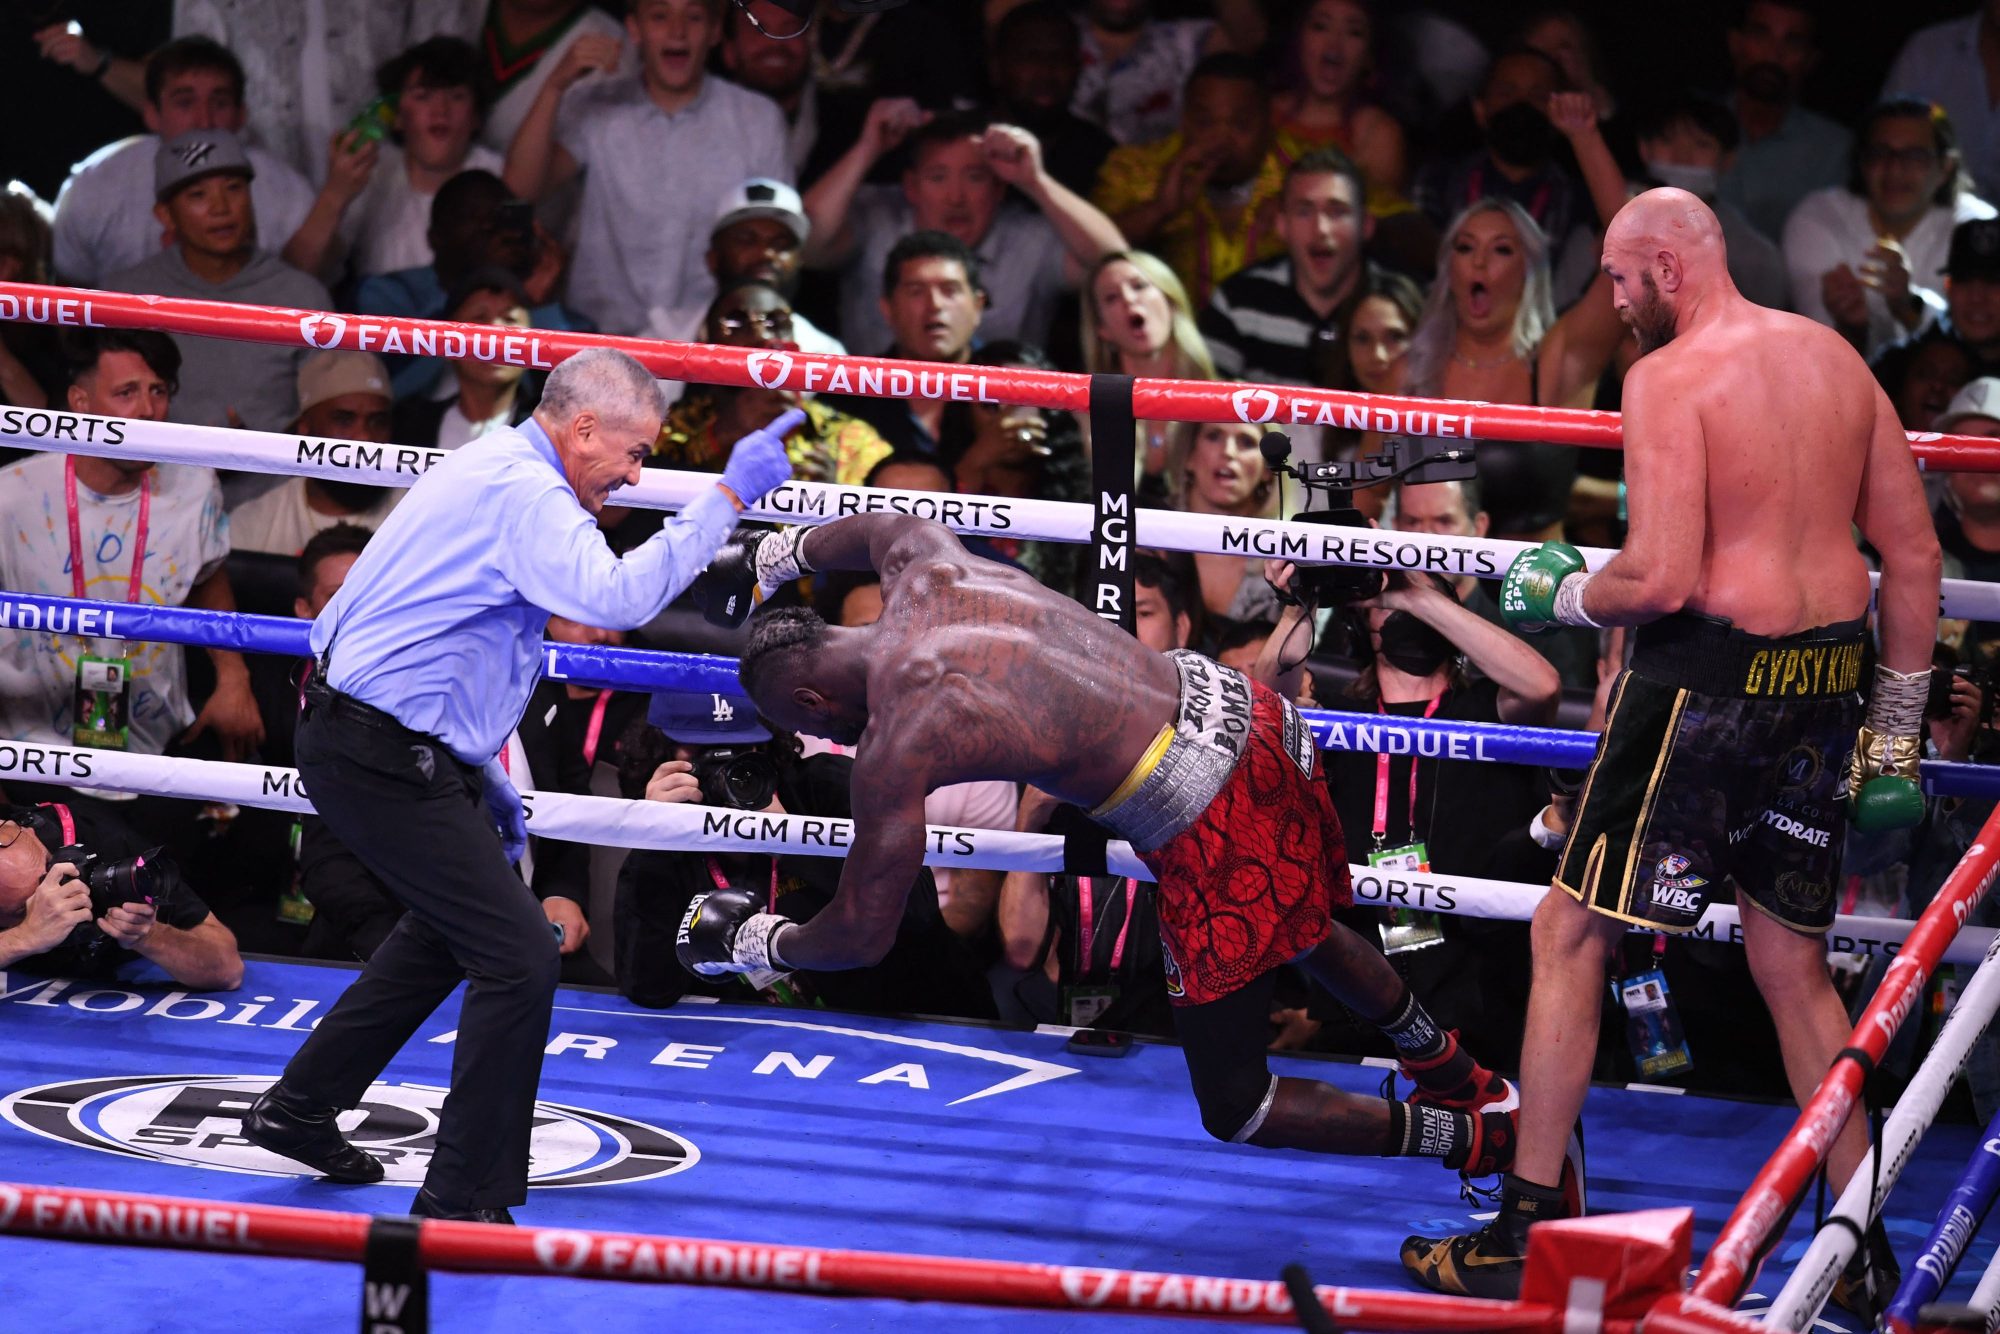 Deontay Wilder falls to the mat